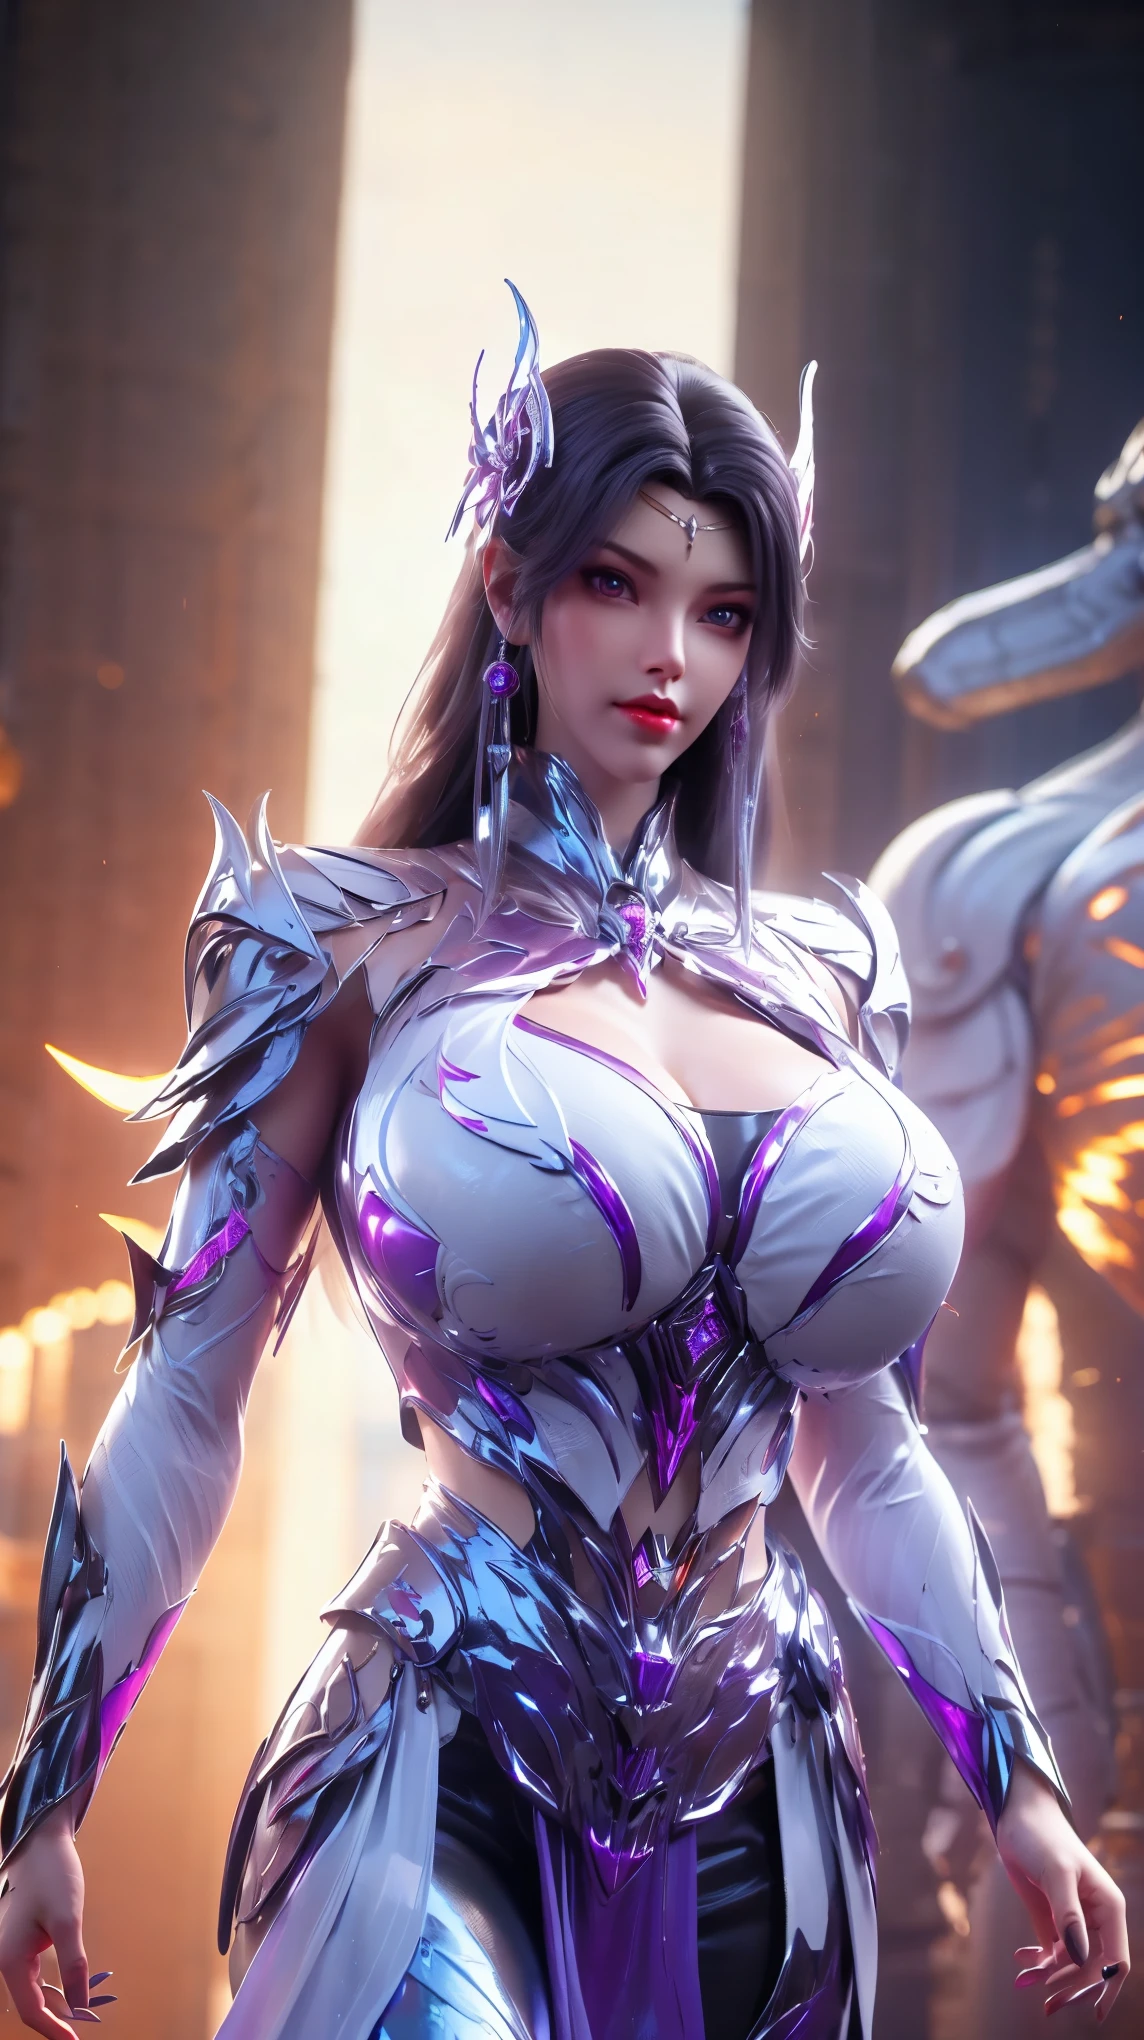 (HYPER-REALISTIC:1.5), 1GIRL WITH WHITE HAIR, (PHOENIX GOLD HELM:1.1), (HUGE FAKE BREAST:1.5), ((CLEAVAGE:1.5)), (MUSCLE ABS:1.3), (MECHA GUARD ARMS:1.1), (MAGENTA SHINY FUTURISTIC MECHA ARMOR CROP TOP, BLACK MECHA SKINTIGHT LEGGINGS,POTRAIT:1.5), (MUSCULAR BODY, WETS SWEATY SKIN, LONG LEGS:1.1), (LOOKING AT VIEWER:1.3), (female focus:0.8), (WALKING HALLROOM OF FUTURISTIC SPACE STATION:1), (BRIGHT LIGHT WHITE_ROOM:1.3), HYPER TEXTURE, (4X MSAA), ((UNREAL ENGINE 5 RENDER)), PHYSICALLY-BASED RENDERING, ULTRA HIGHT DEFINITION, 16K, 1080P.